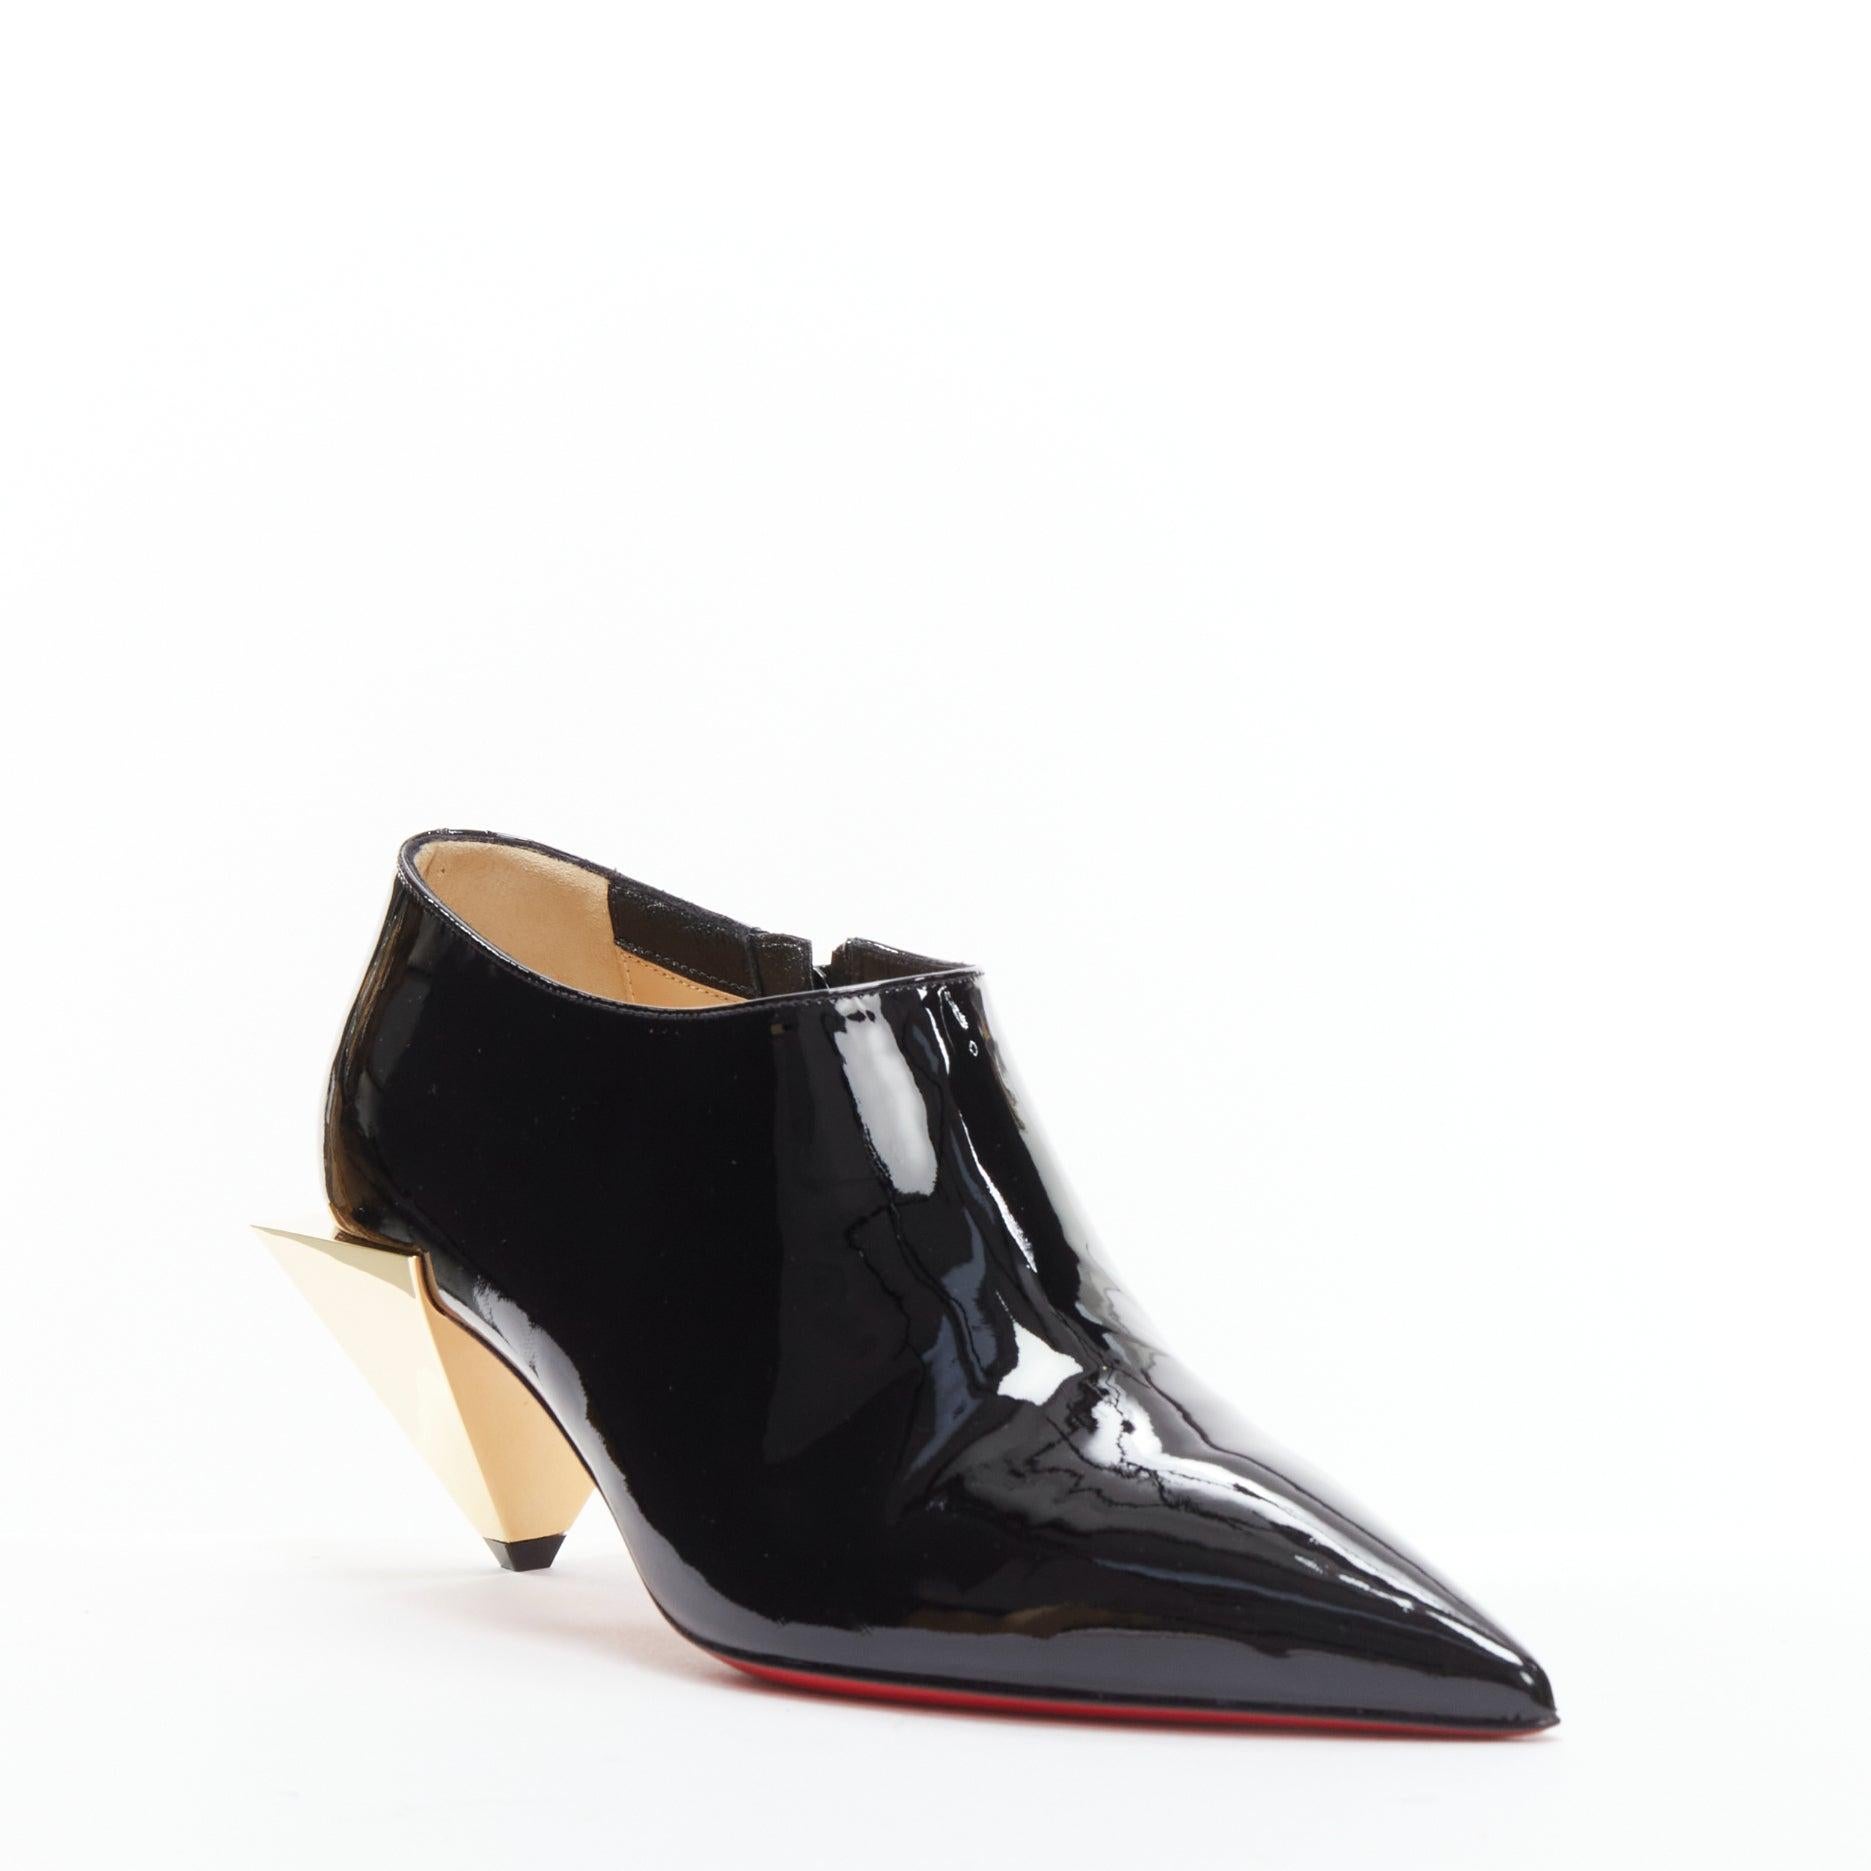 CHRISTIAN LOUBOUTIN Xilobooties 55 gold pyramid heel black patent pump EU38
Reference: TGAS/D00642
Brand: Christian Louboutin
Model: Xilobooties 55
Material: Patent Leather, Metal
Color: Black, Gold
Pattern: Solid
Closure: Zip
Lining: Nude